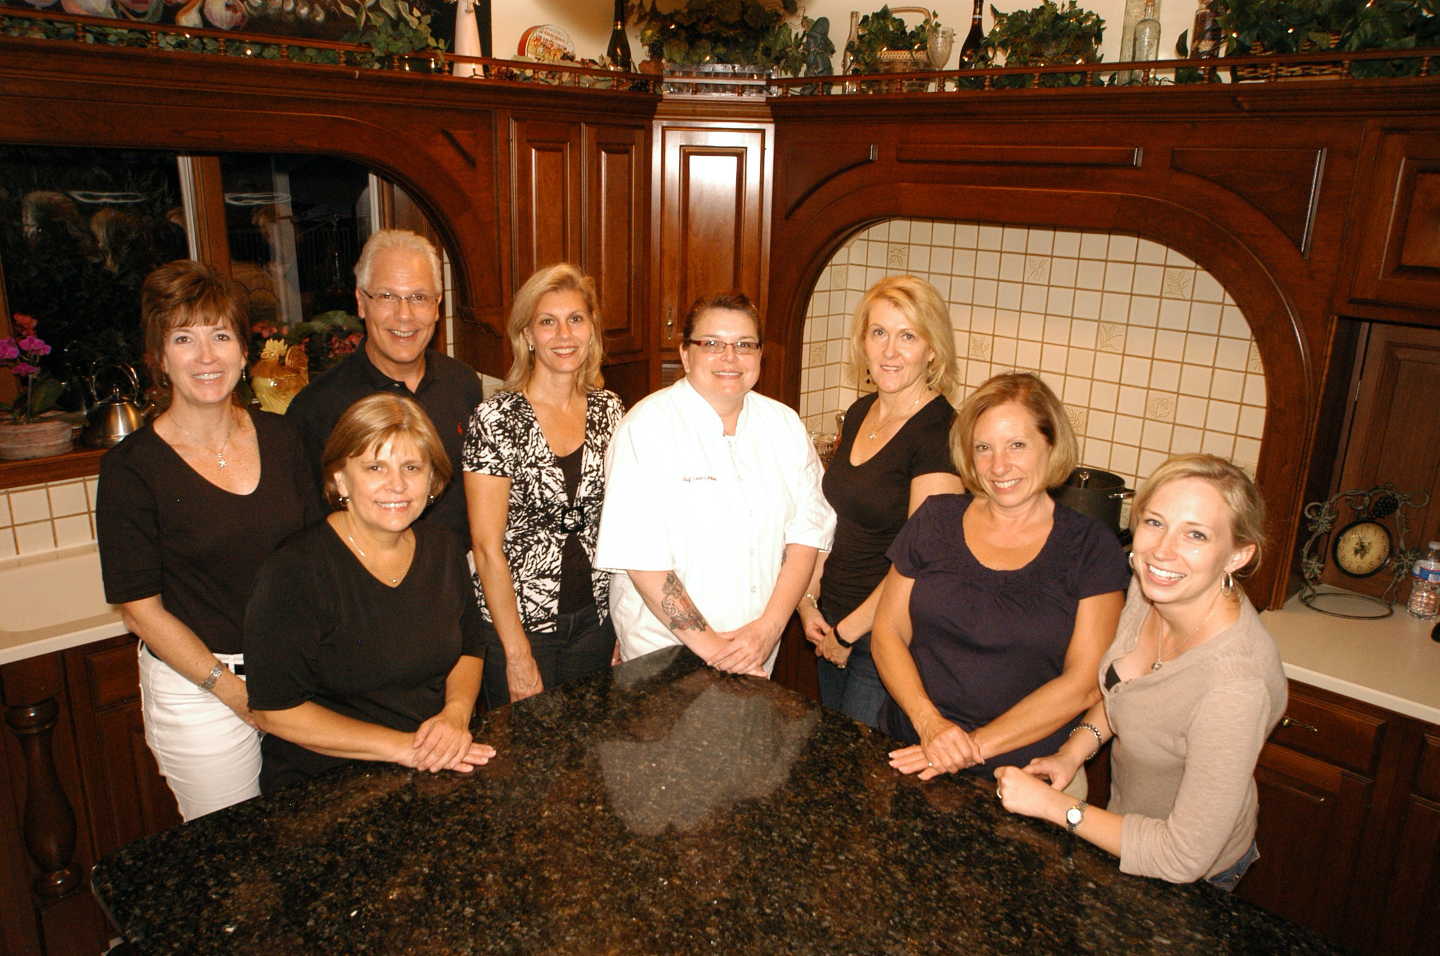 Chef in Ananville Inn kitchen surrounded by seven students for one of Annville Inn's Acclaimed Chef Cooking Classes